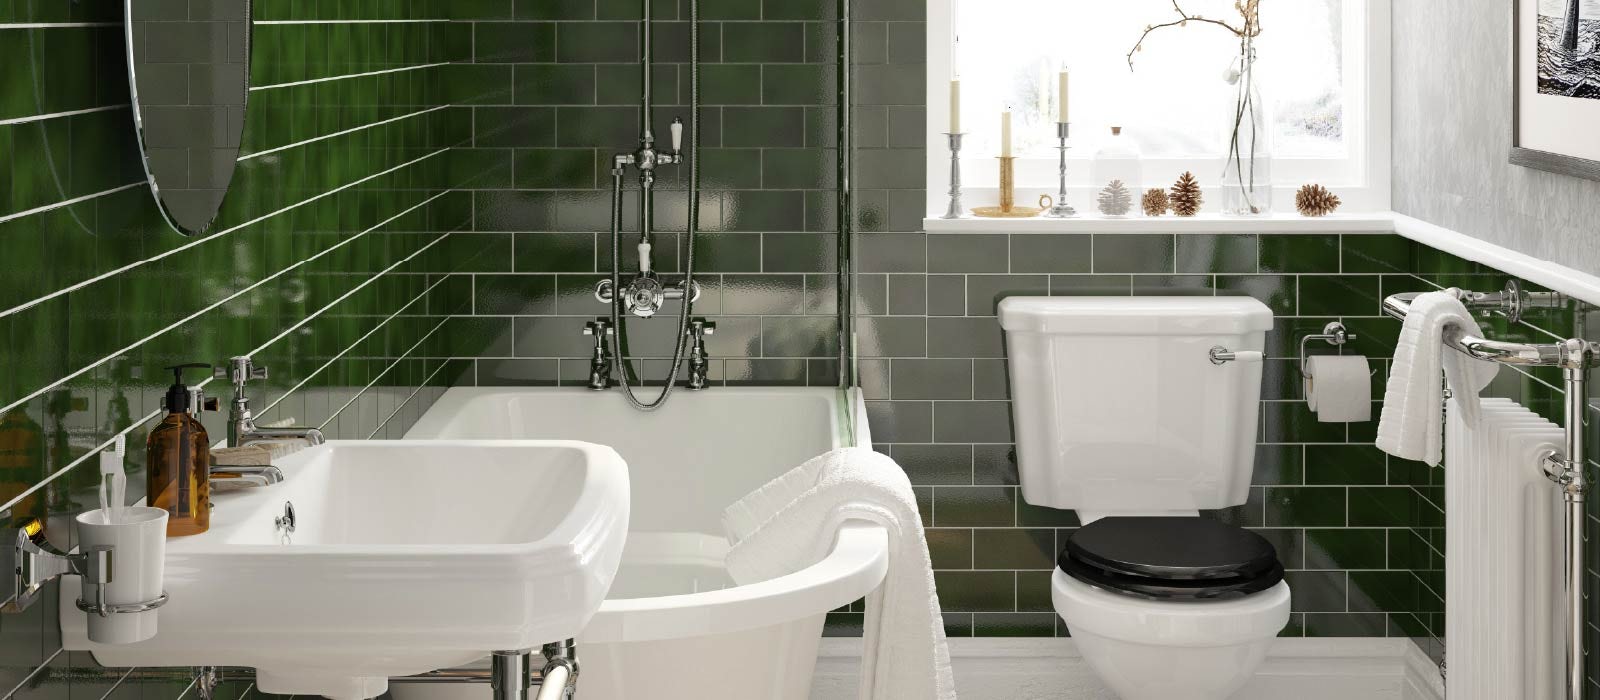 Checklist: What You Need To Tile Your Bathroom - Walls and Floors